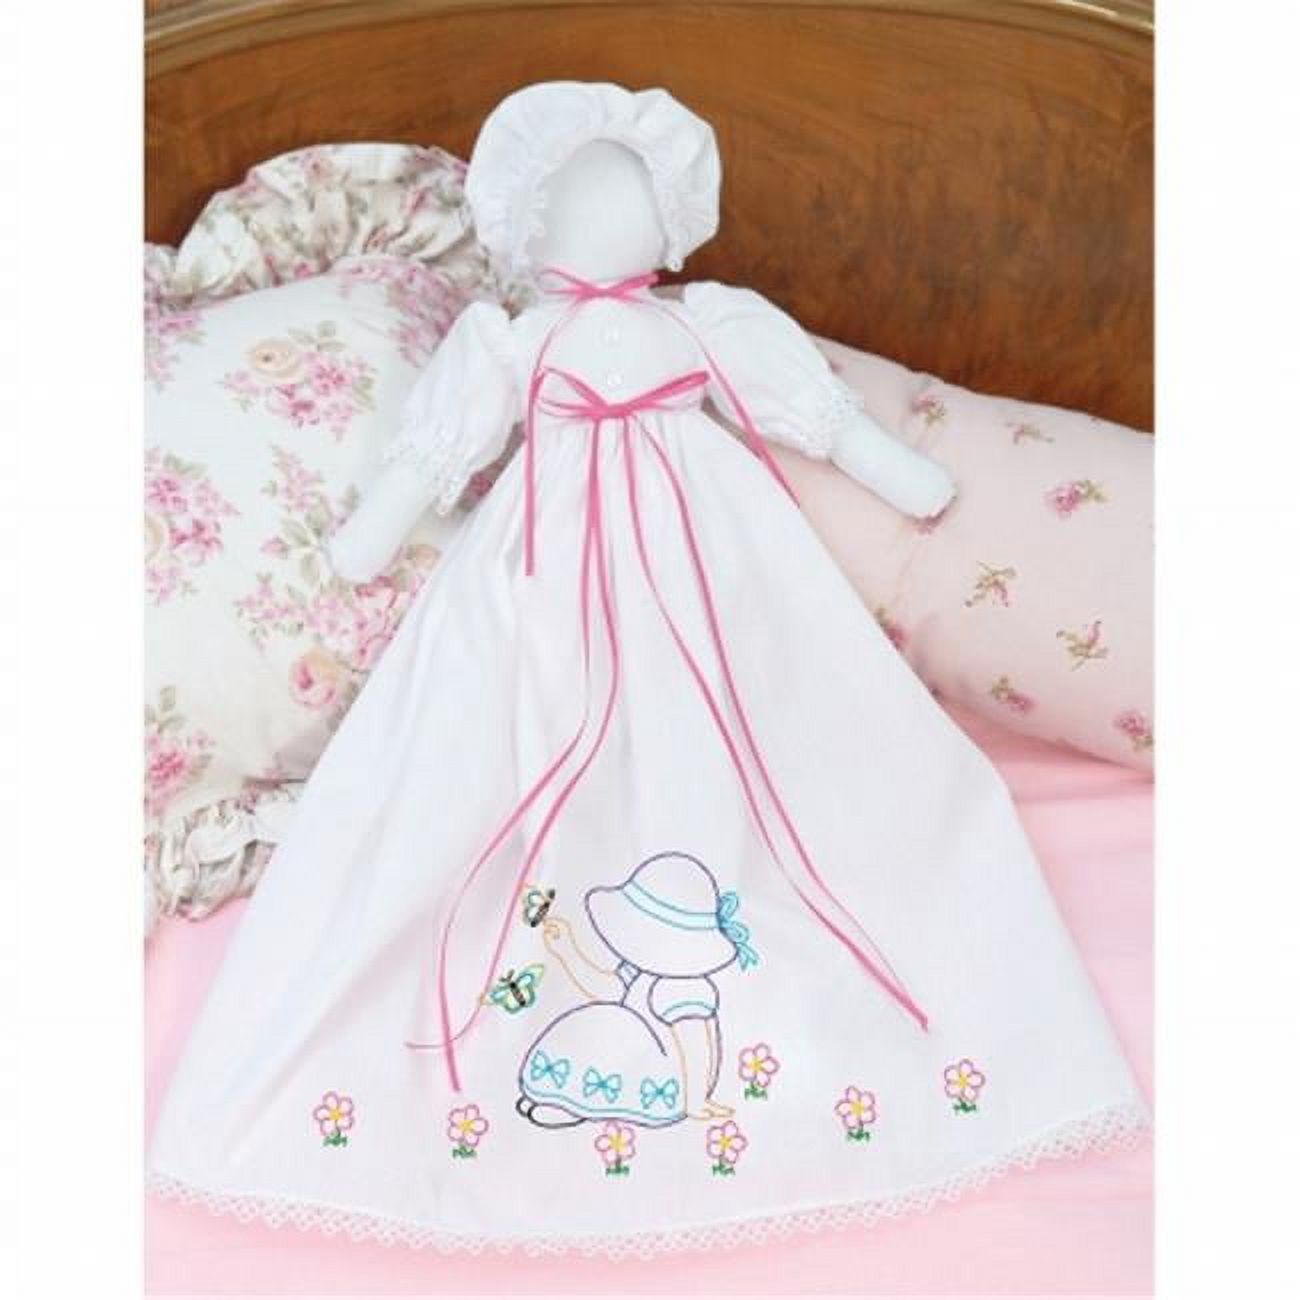 Jack Dempsey Stamped White Pillowcase Doll Kit-Sunbonnet Sue - image 1 of 2